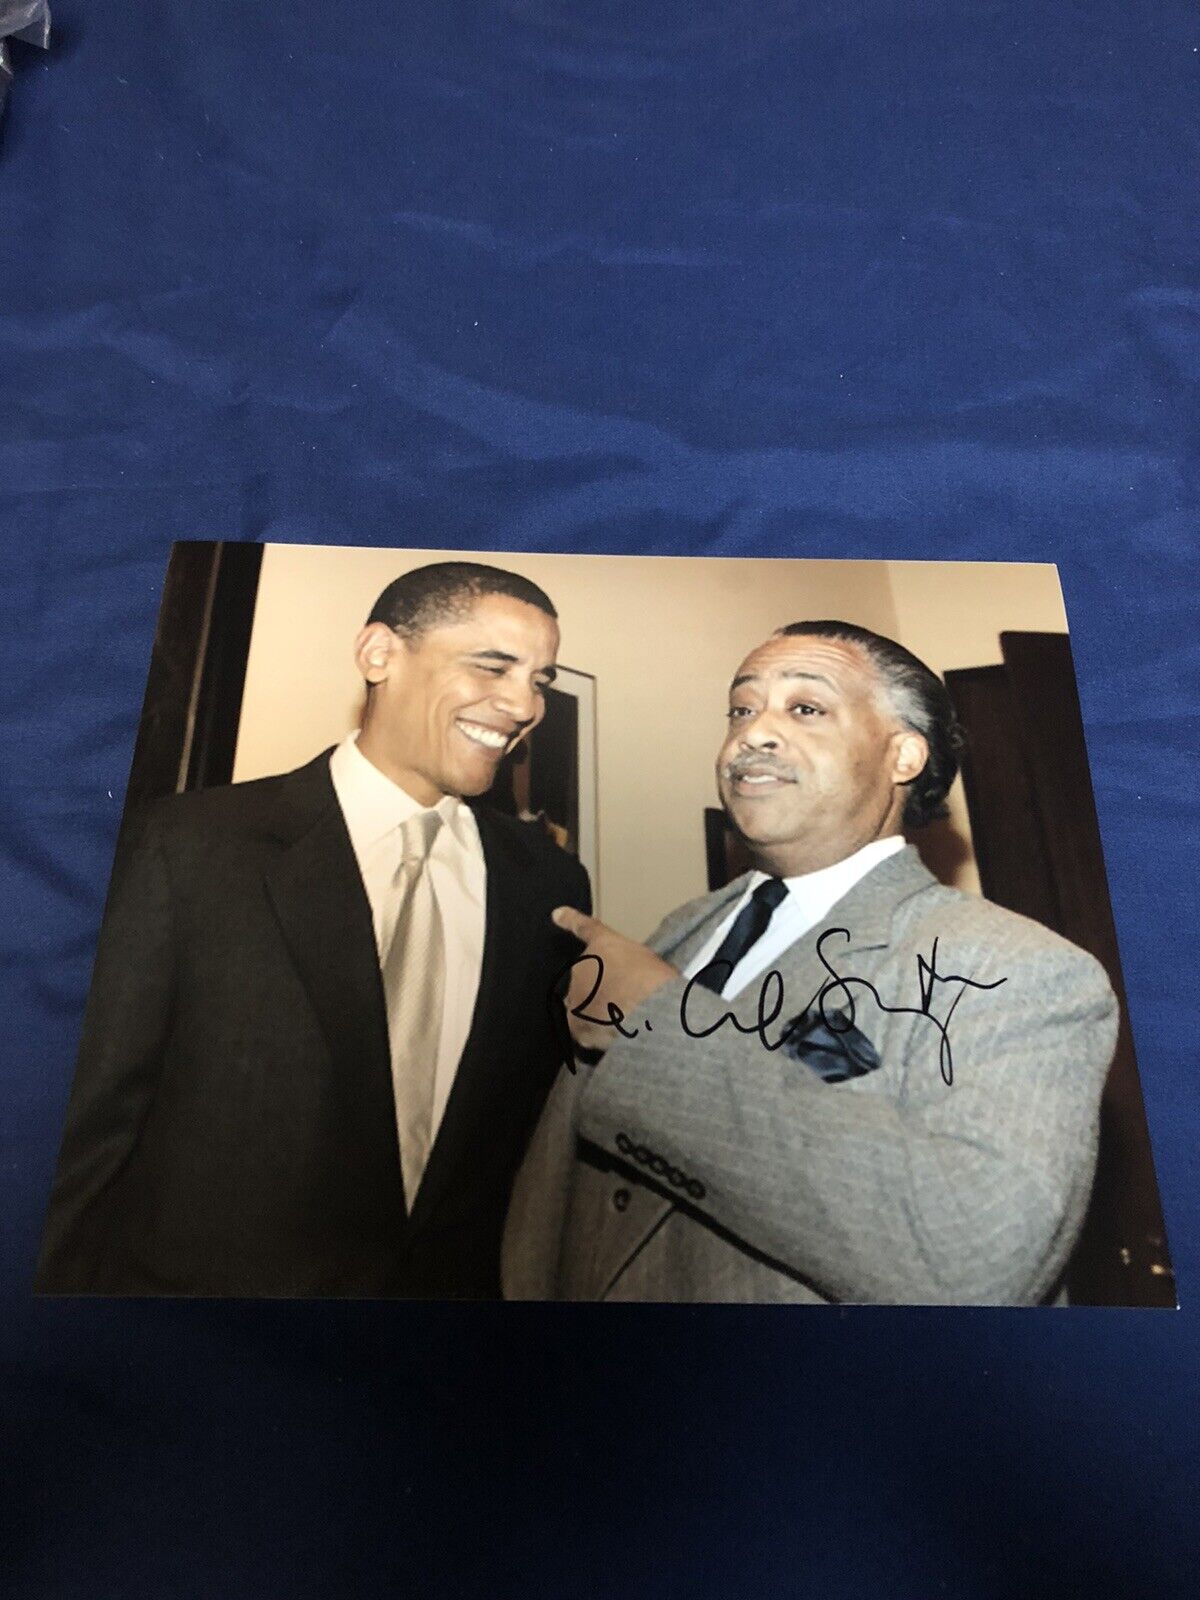 THE REVEREND AL SHARPTON SIGNED AUTOGRAPHED 8X10 PHOTO WITH BARACK OBAMA PROOF